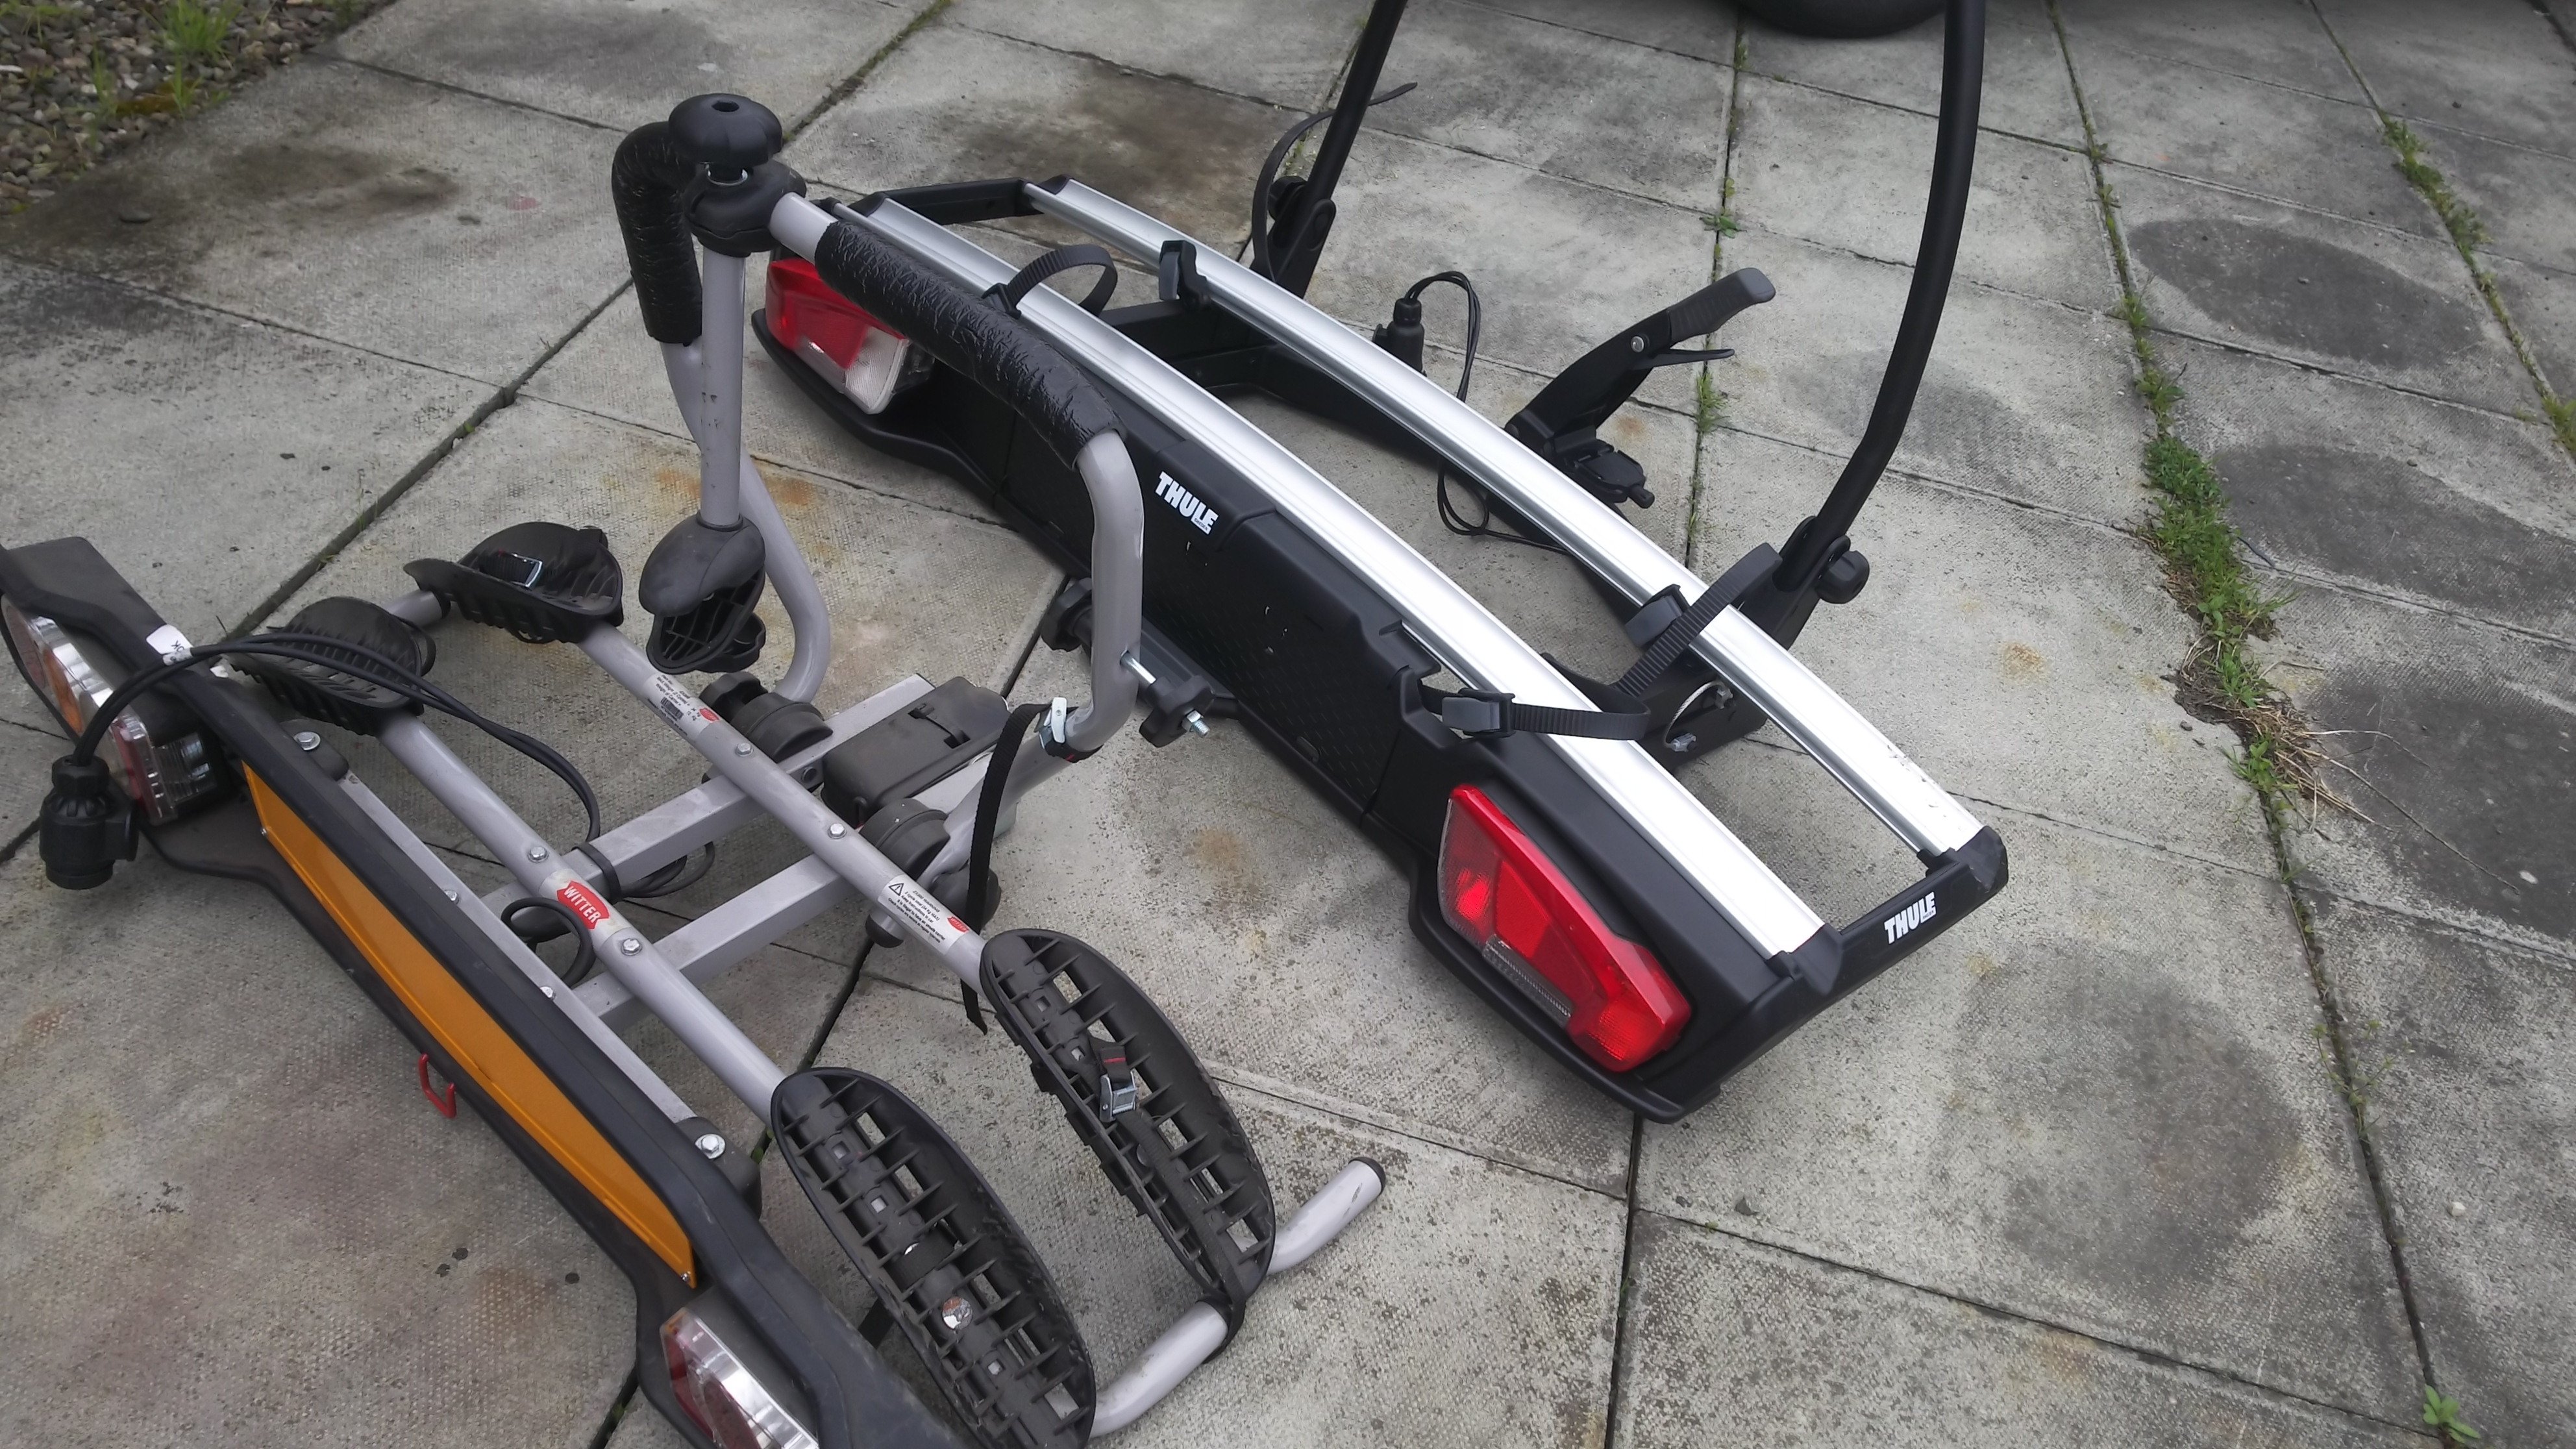 Thule VeloSpace XT 2 bike carrier, anyone with experience? - Health ...